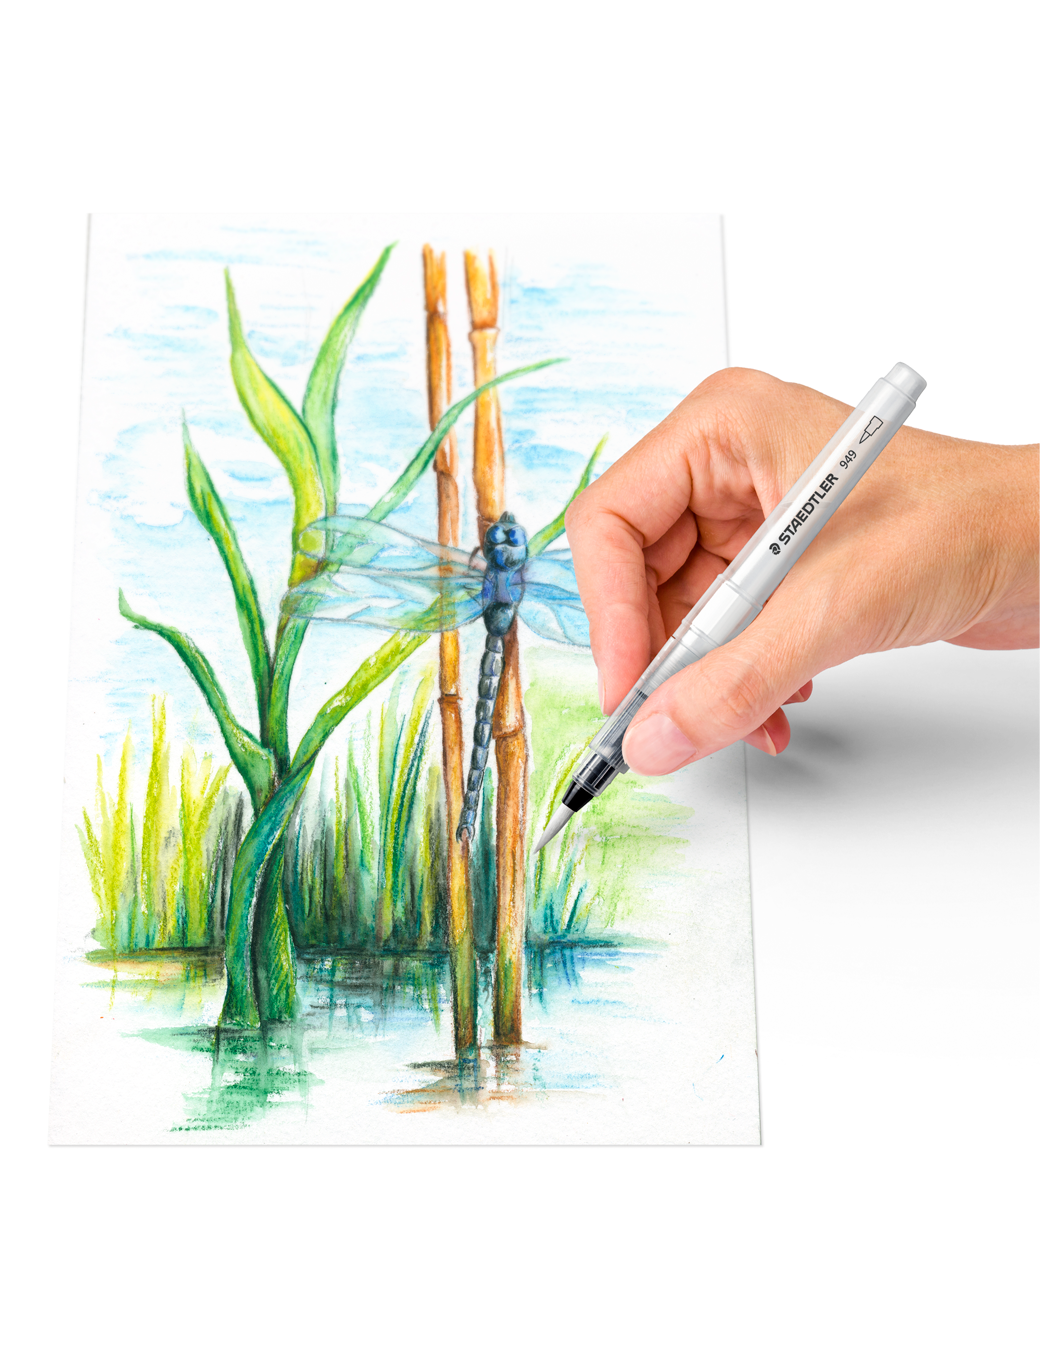 STAEDTLER® 223, watercolor crayons, used with water brush